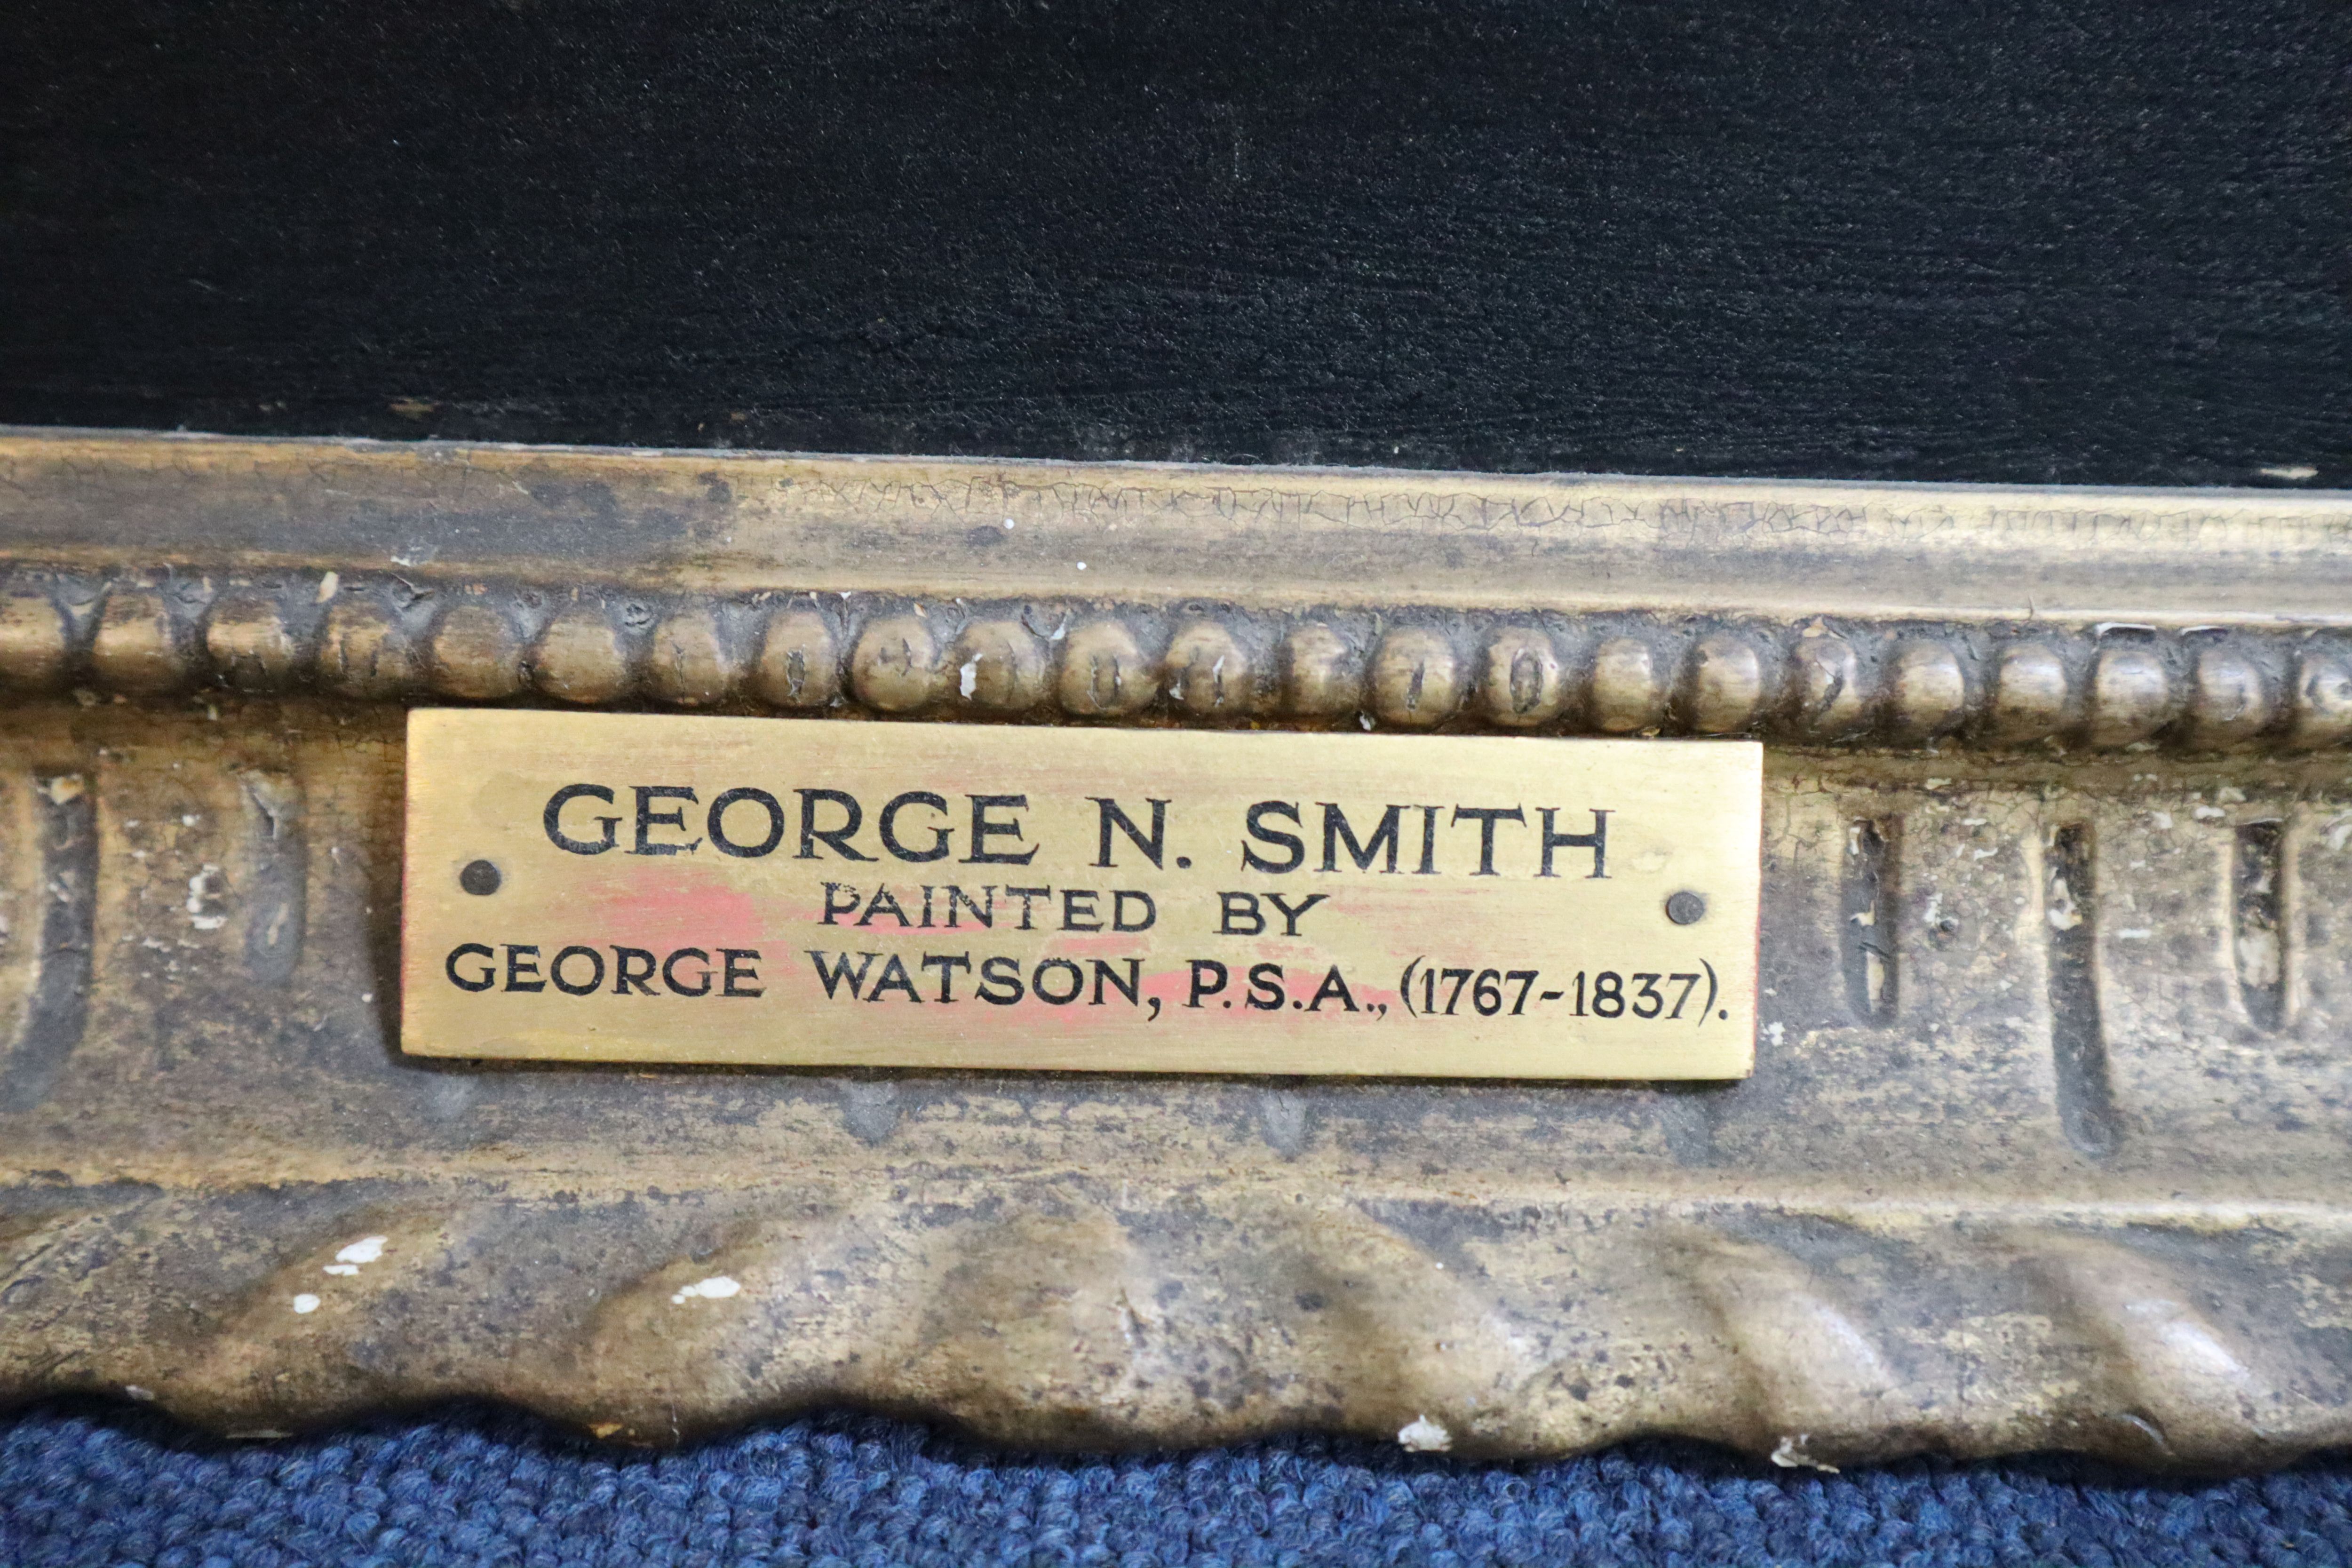 George Watson PSA (1767-1837) Head and shoulder portrait of the artist George N. Smith 28.5 x 24in.